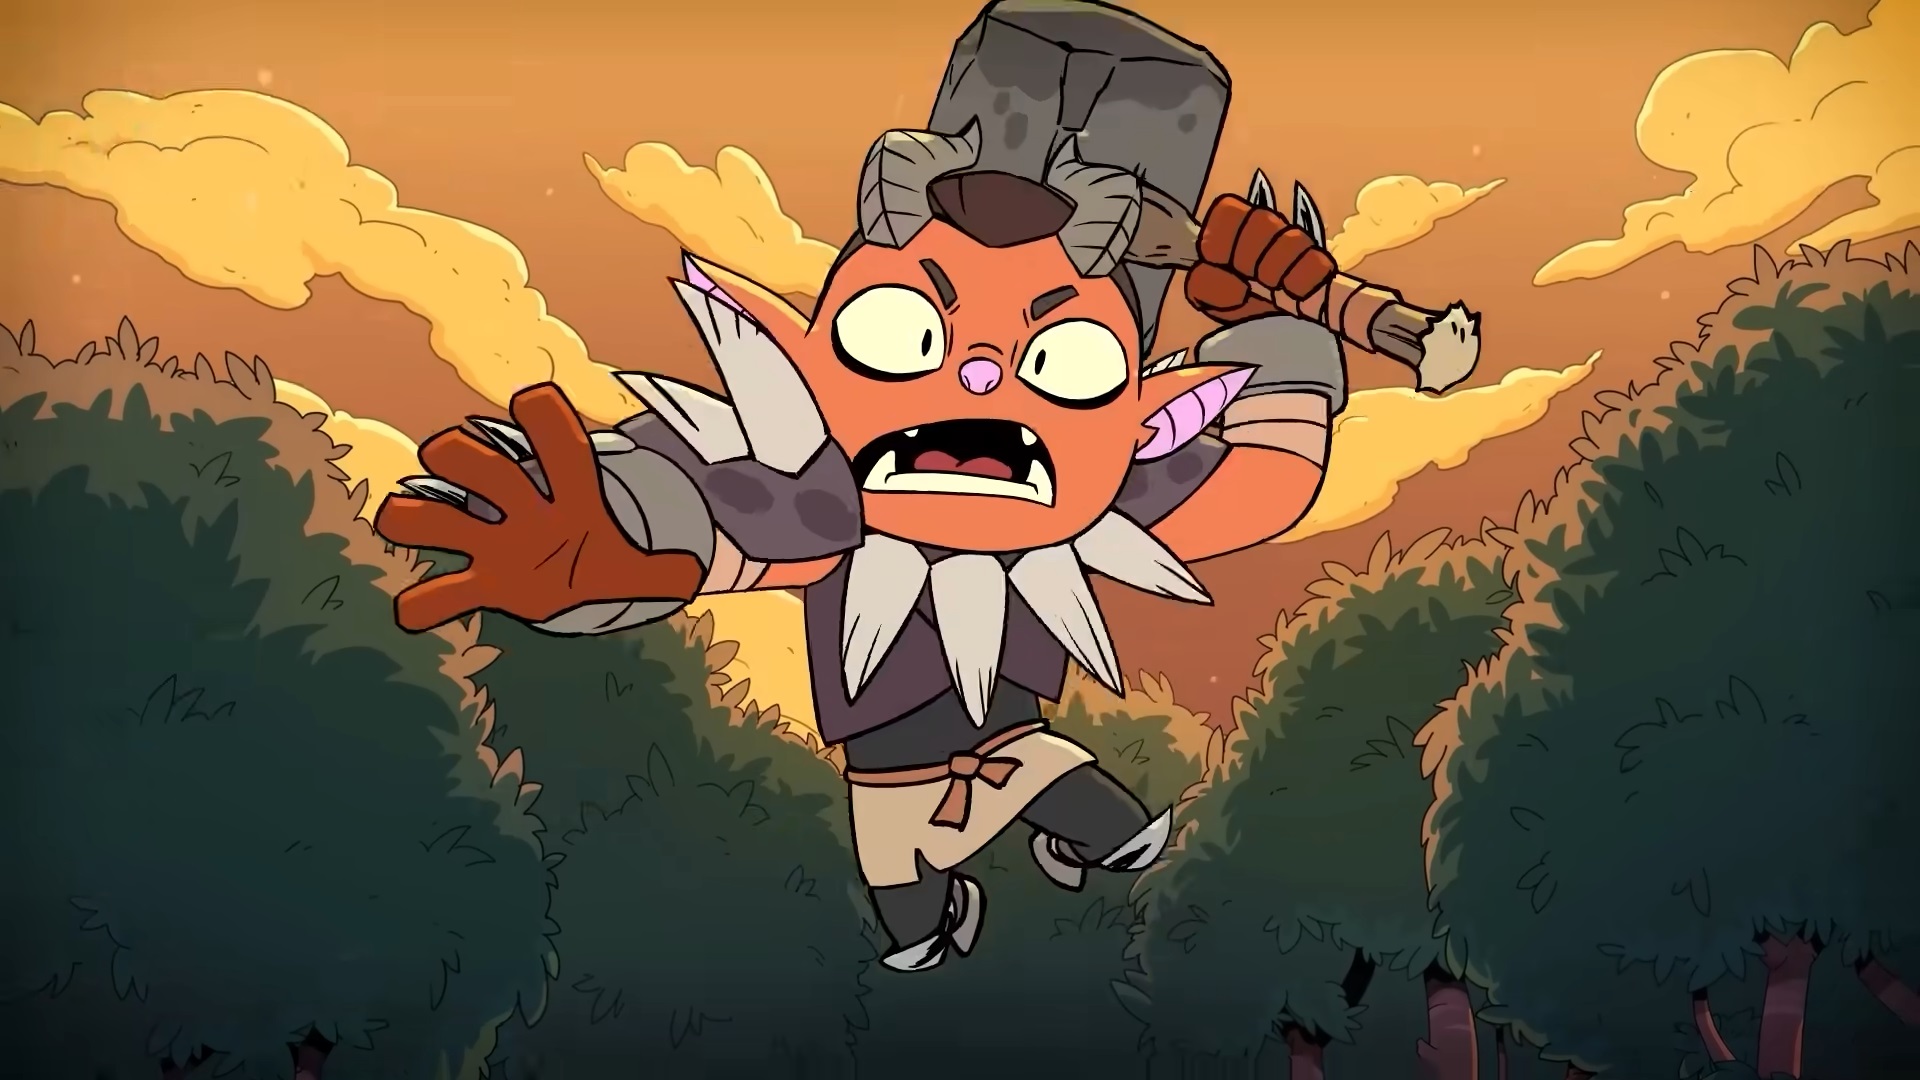 The co-op roguelike from indie powerhouse and Don’t Starve dev Klei Entertainment is even better than I’d hoped, and a must-play Steam Next Fest demo